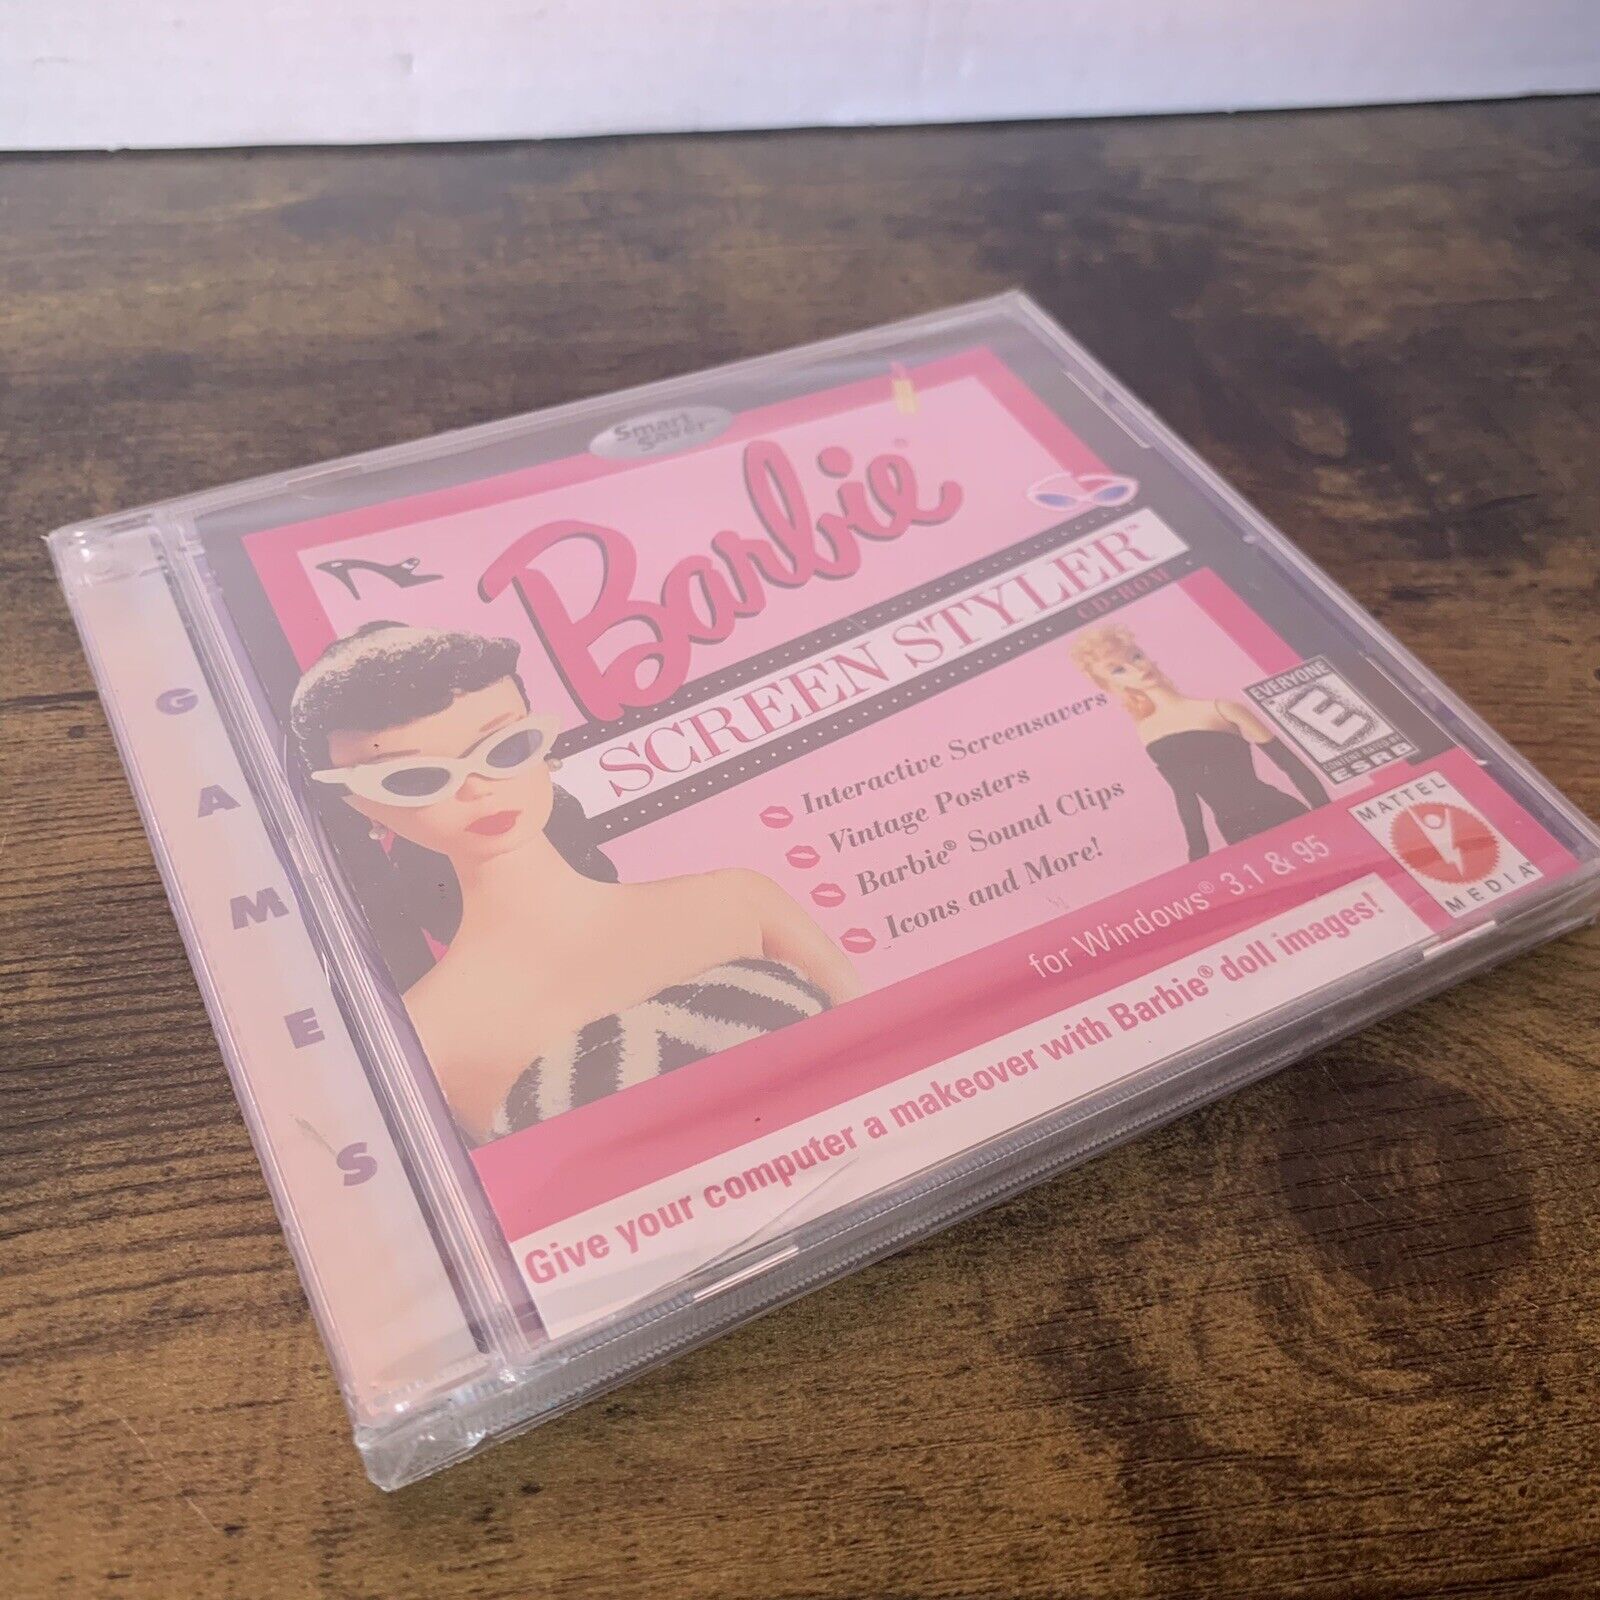 Barbie Screen Styler (PC-CD 1997) for Windows 95 - NEW Sealed